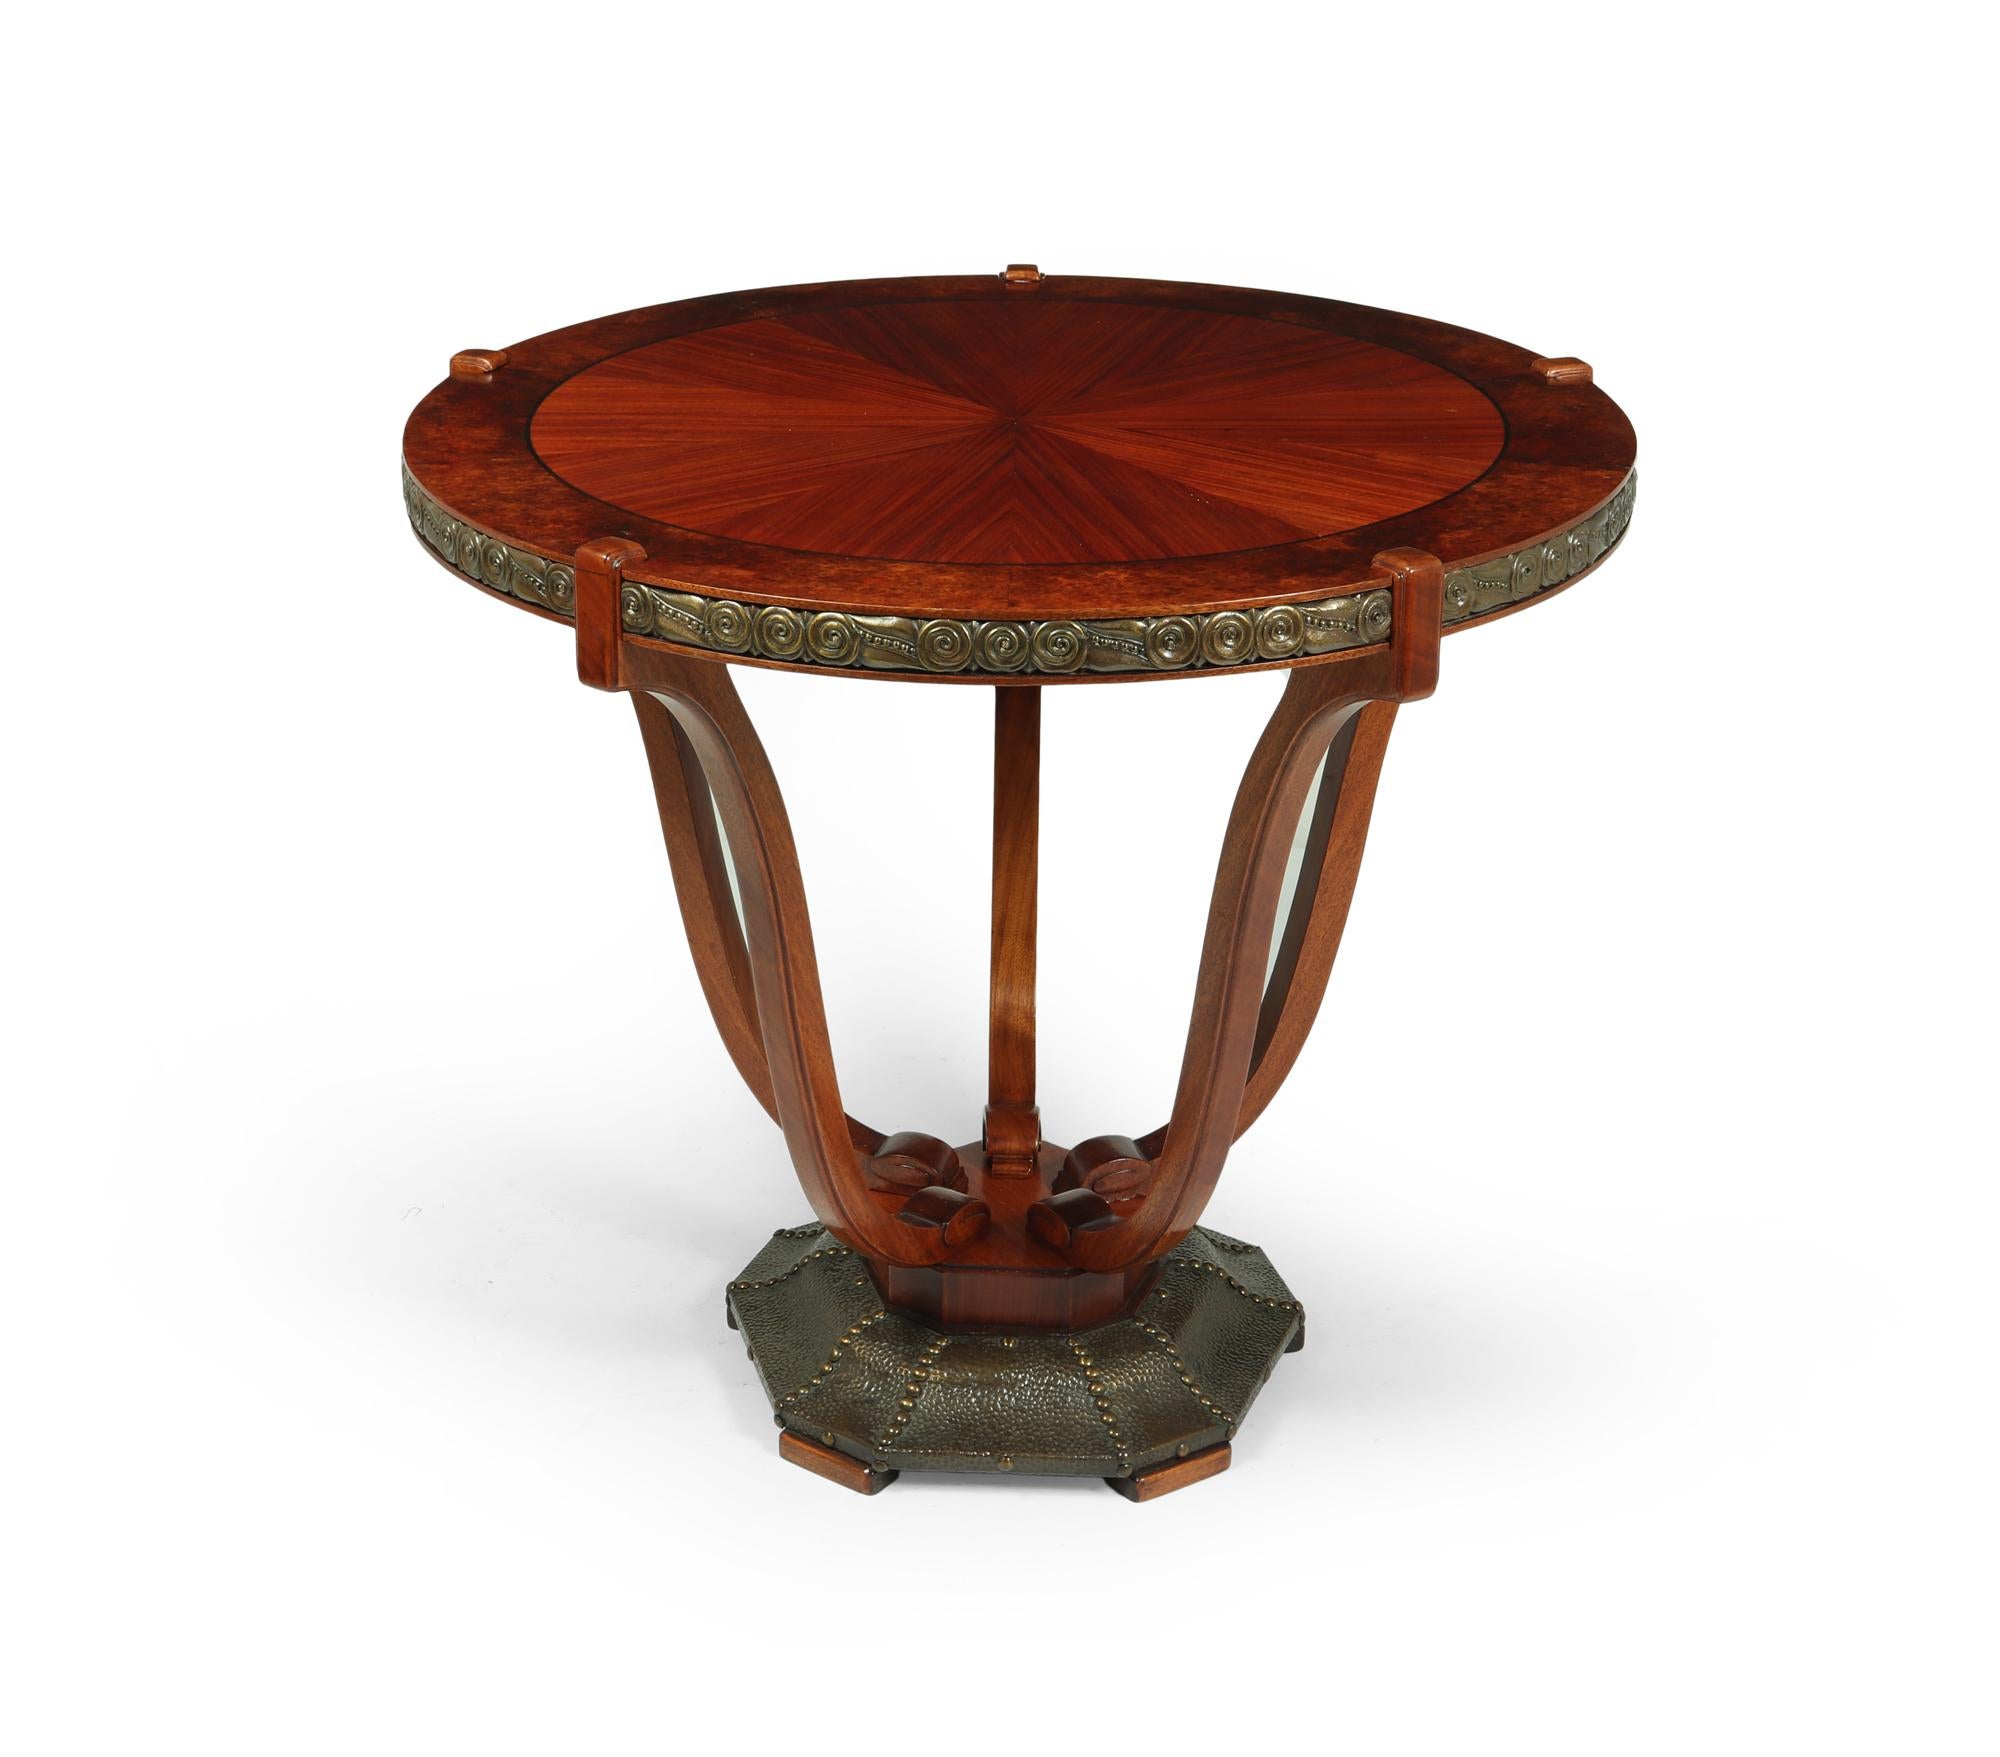 French Art Deco Centre Table by Maurice Dufrene, c1920